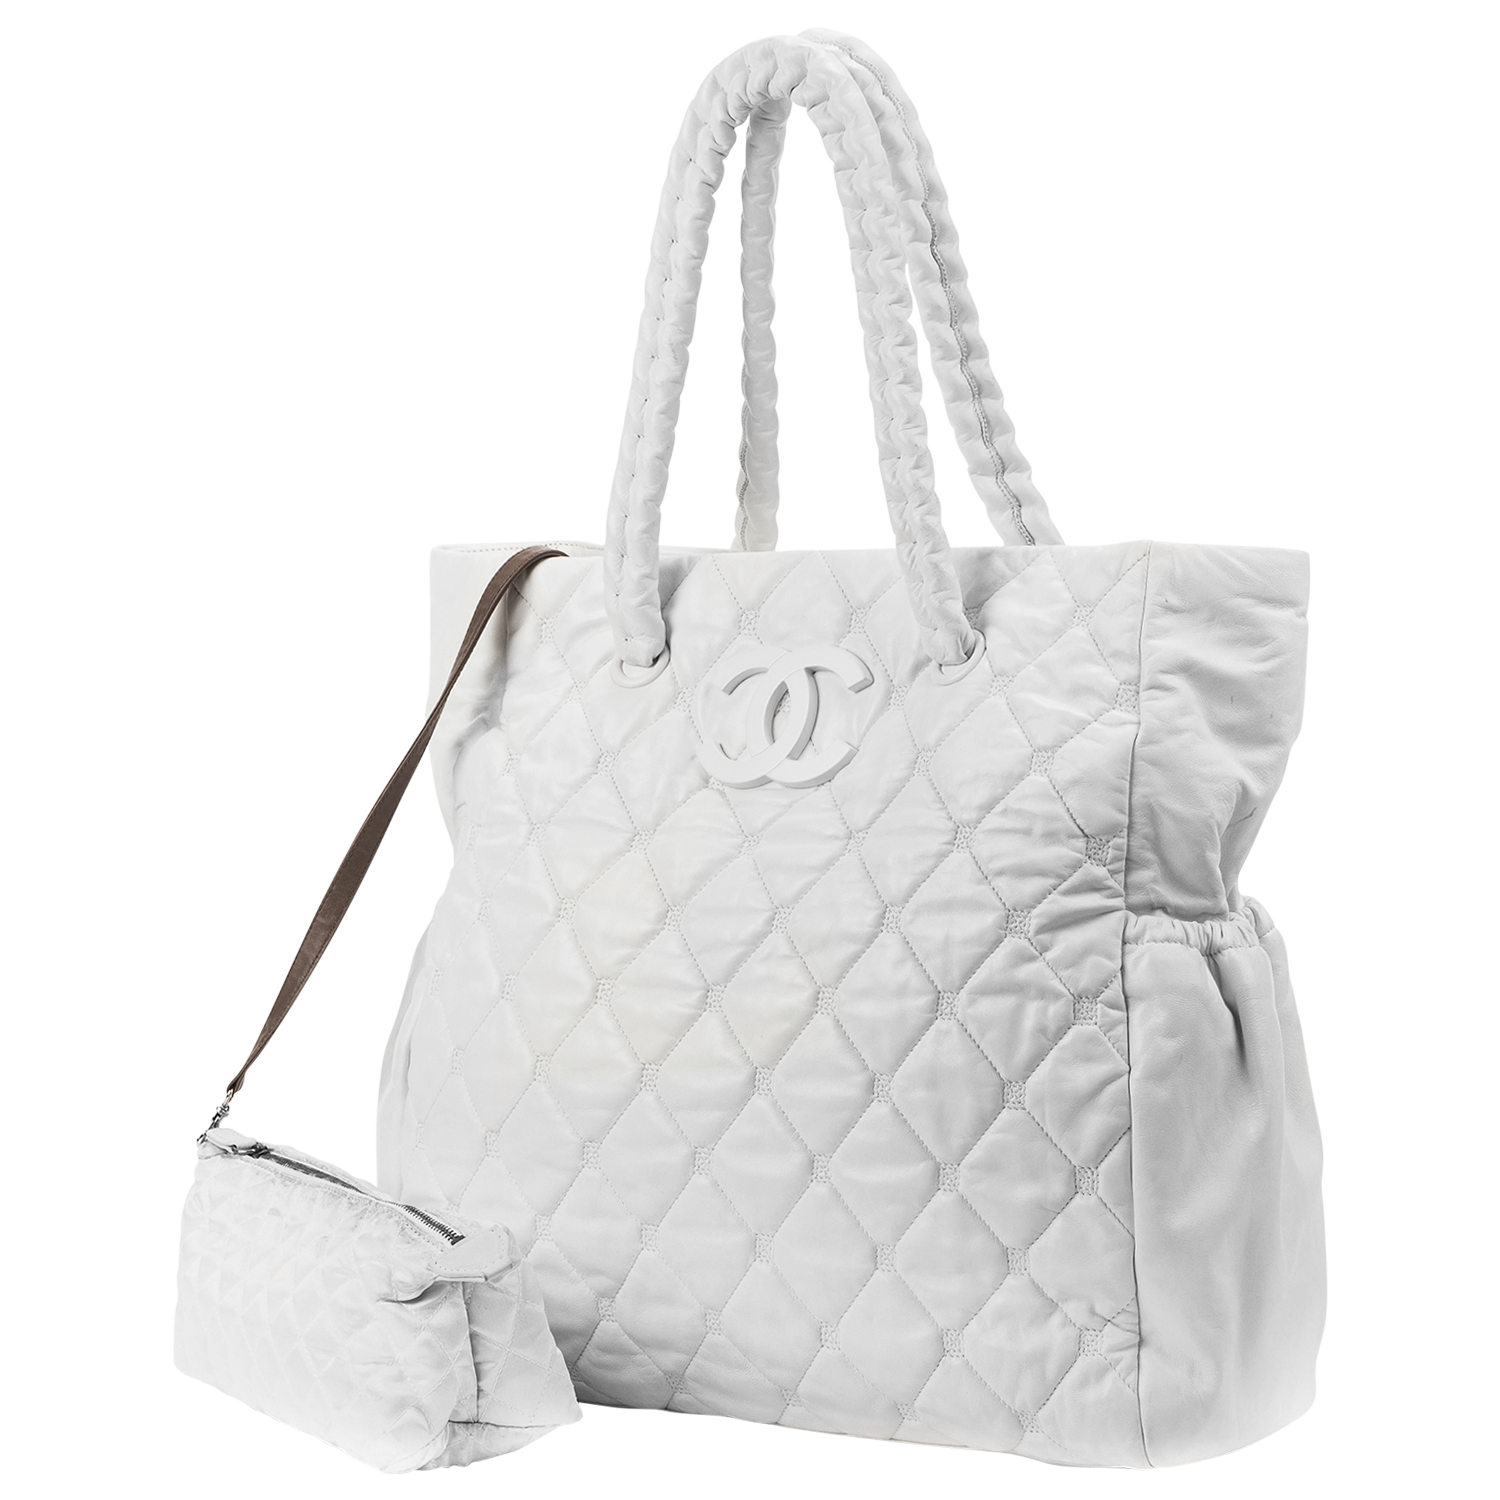 Snag the Latest CHANEL Tote White Bags & Handbags for Women with Fast and  Free Shipping. Authenticity Guaranteed on Designer Handbags $500+ at .